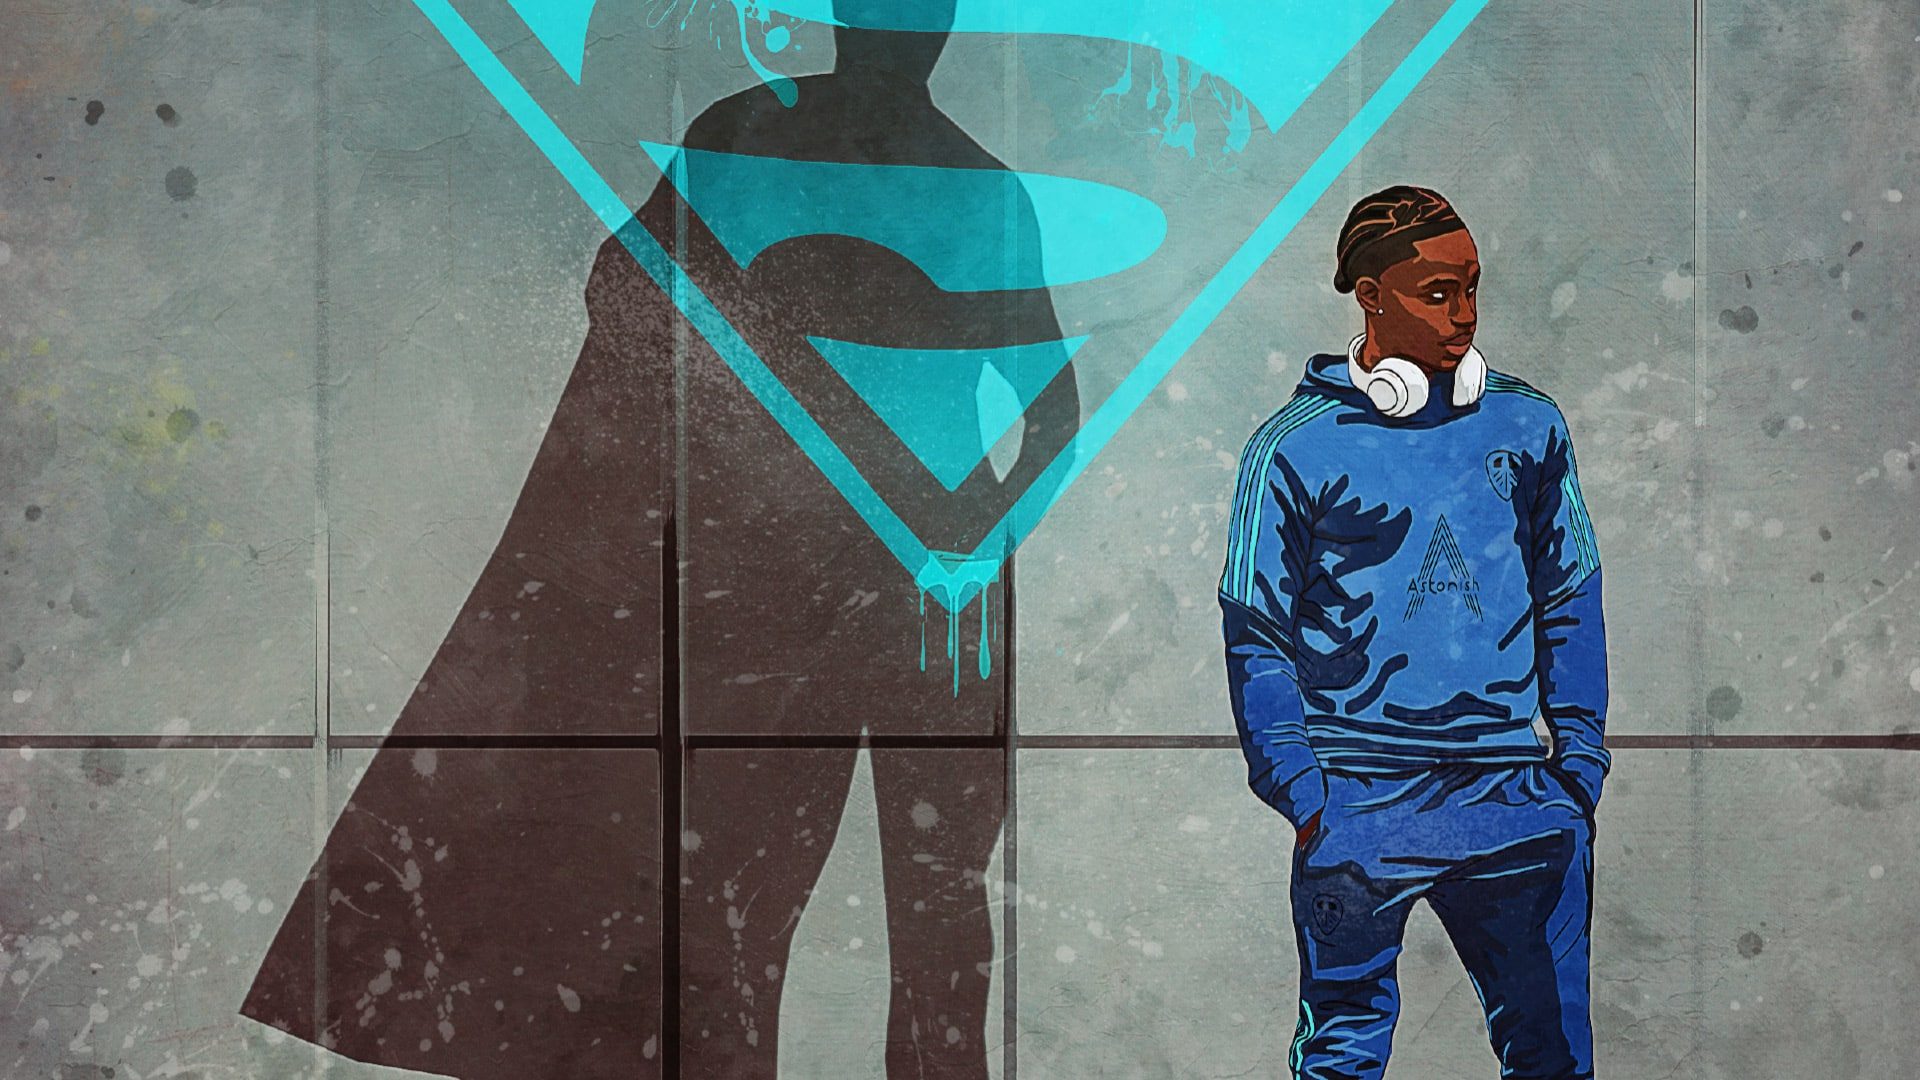 A drawing of Crysencio Summerville in his street clothes, casting a shadow with a cape and a Superman sign